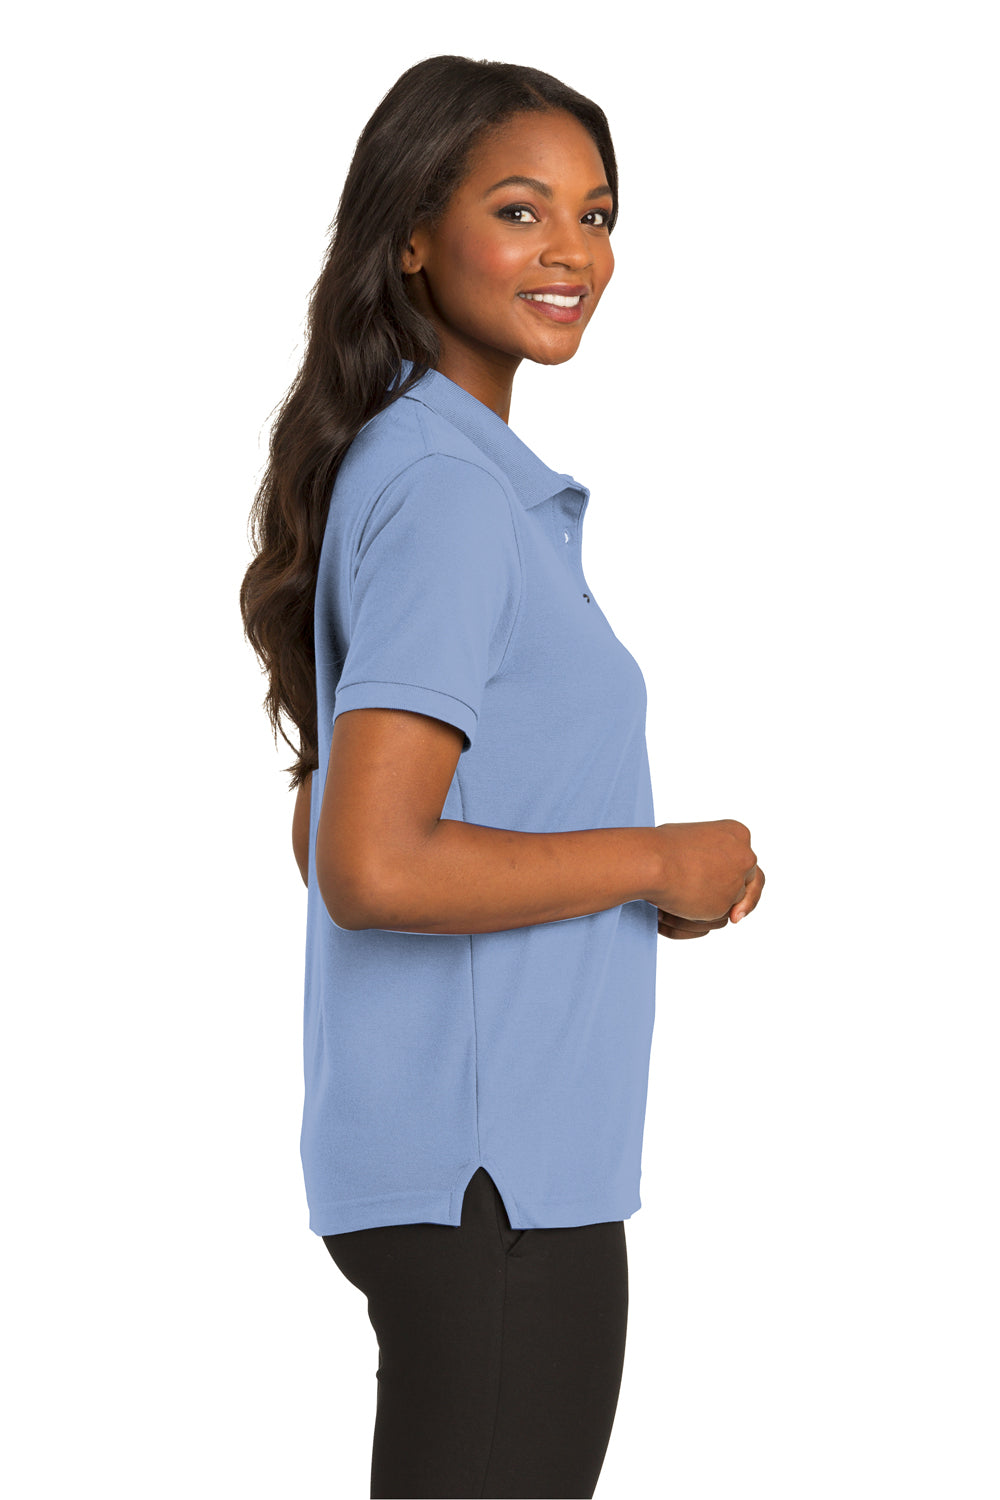 Port Authority L500 Womens Silk Touch Wrinkle Resistant Short Sleeve Polo Shirt Light Blue Side